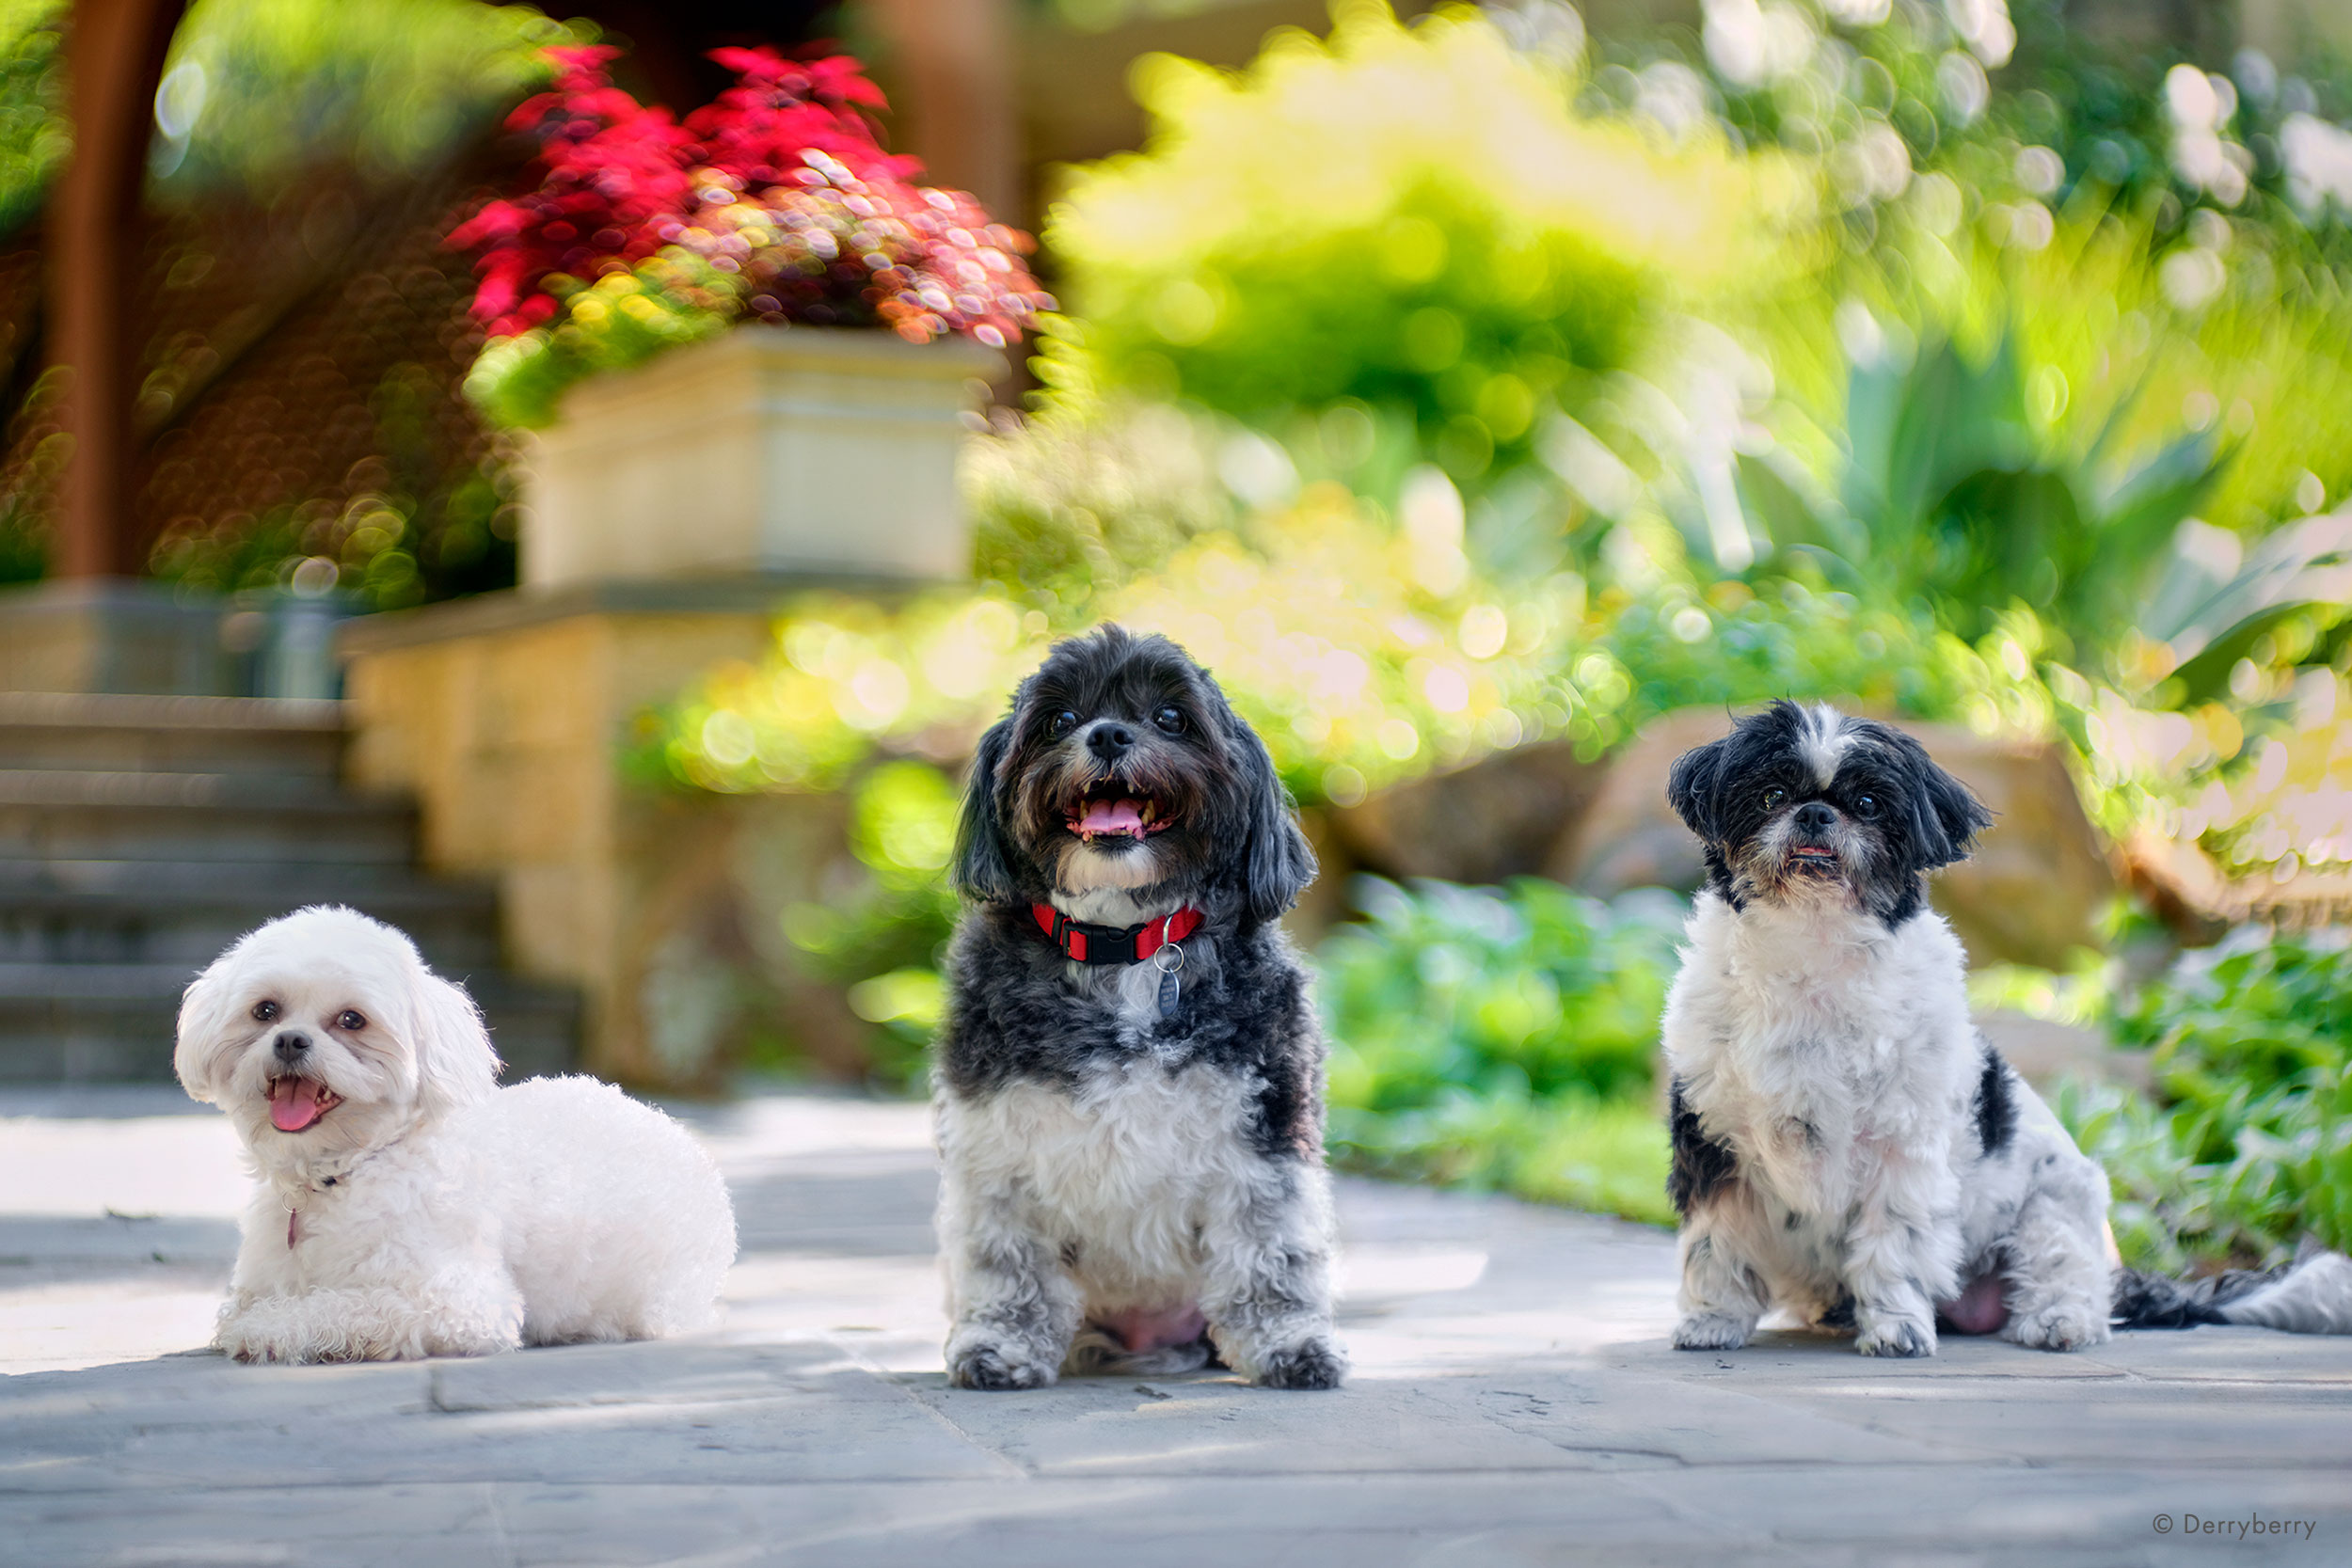 Three happy dogs surrounded by a lush green garden and beautiful red flowers